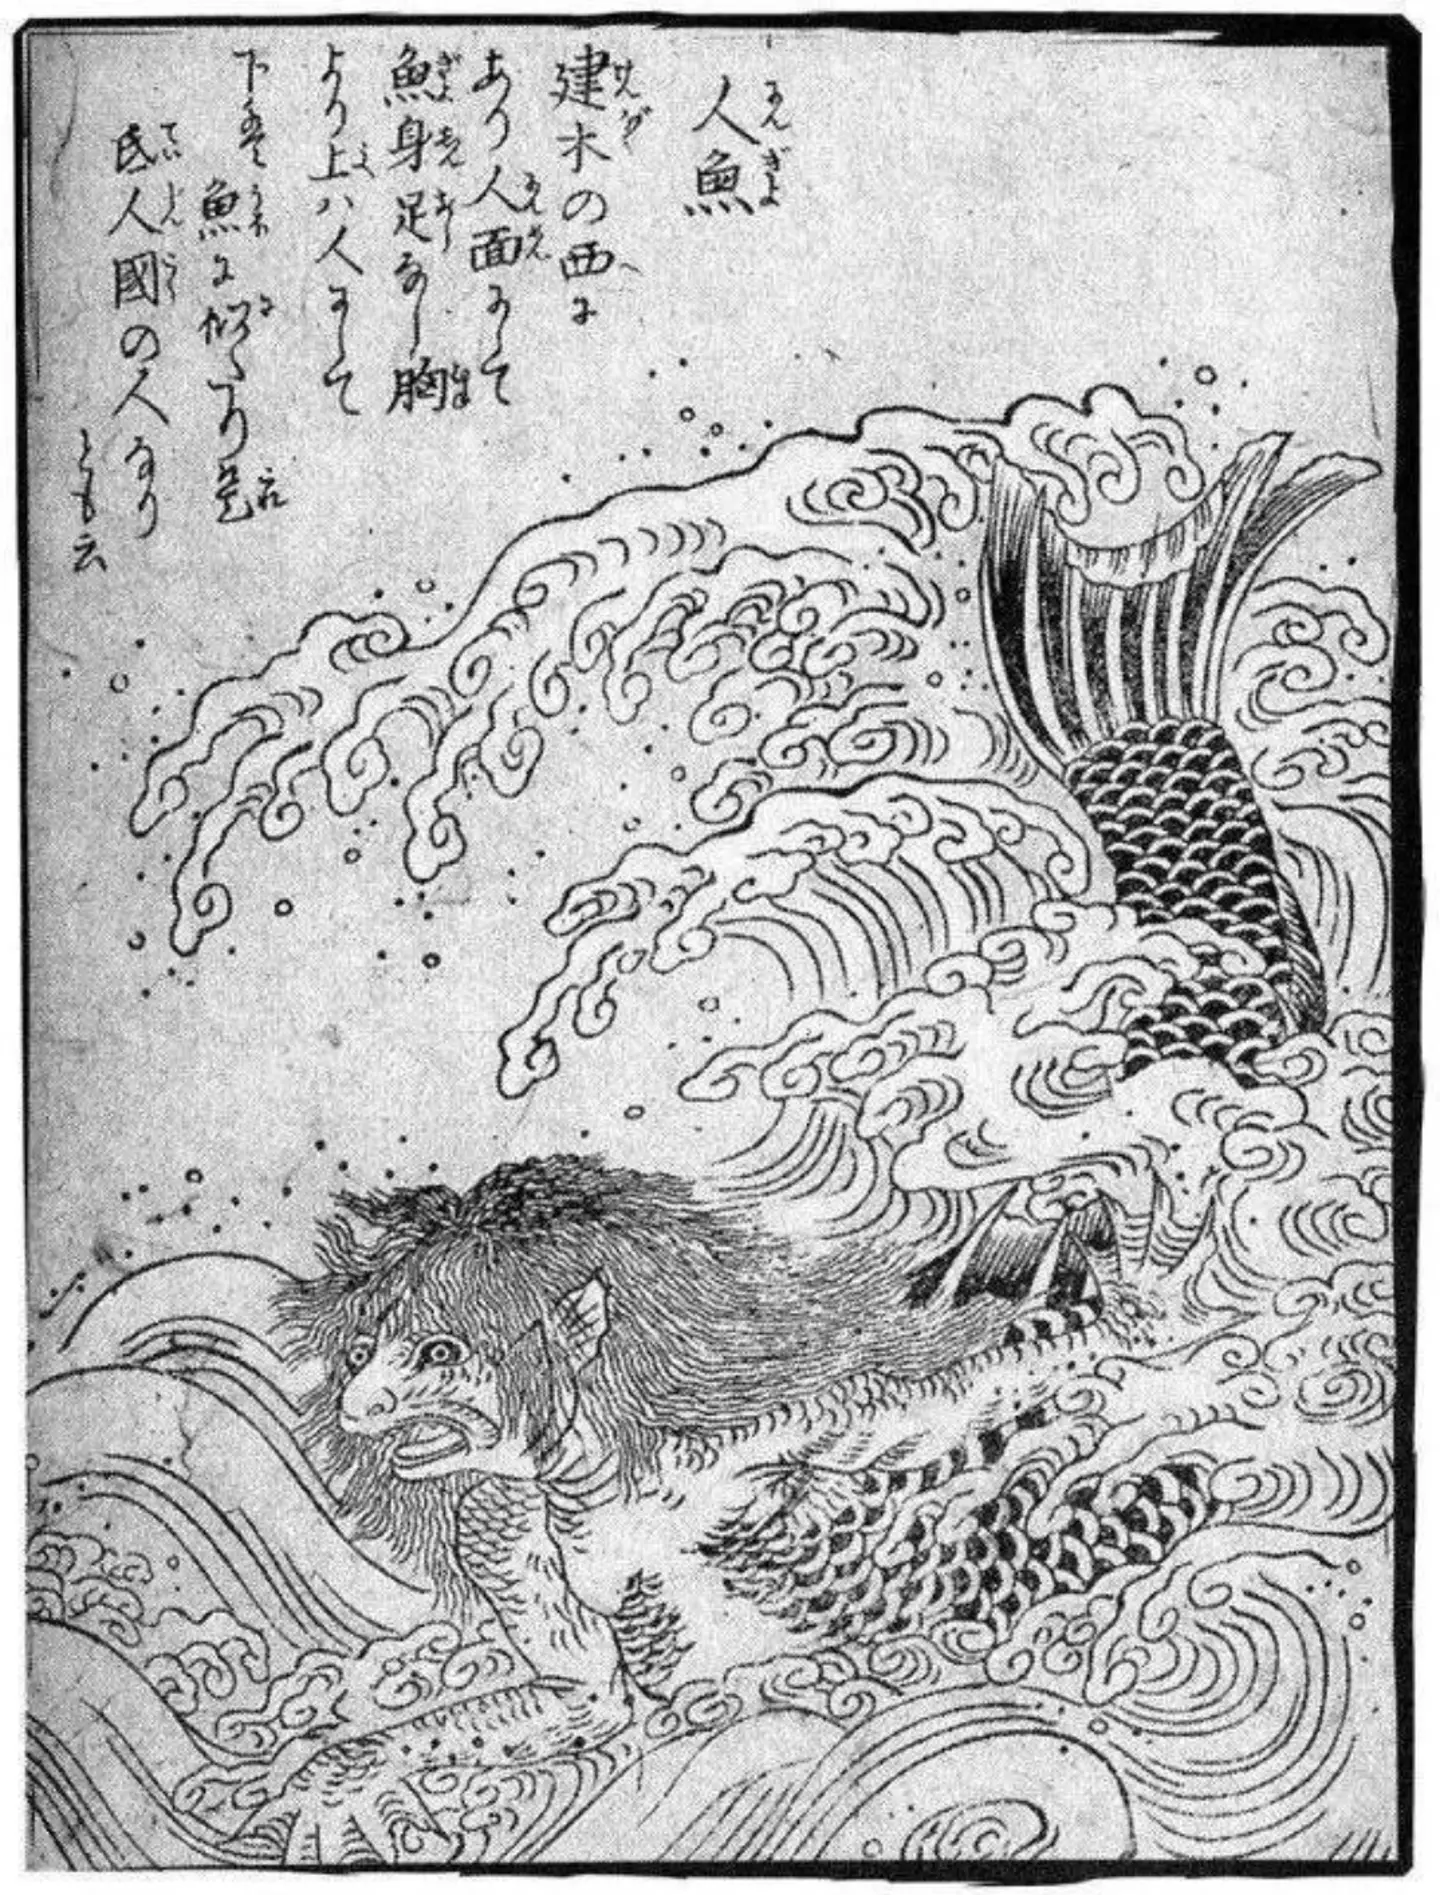 Japanese Folklore about mermaids. (Pen News)